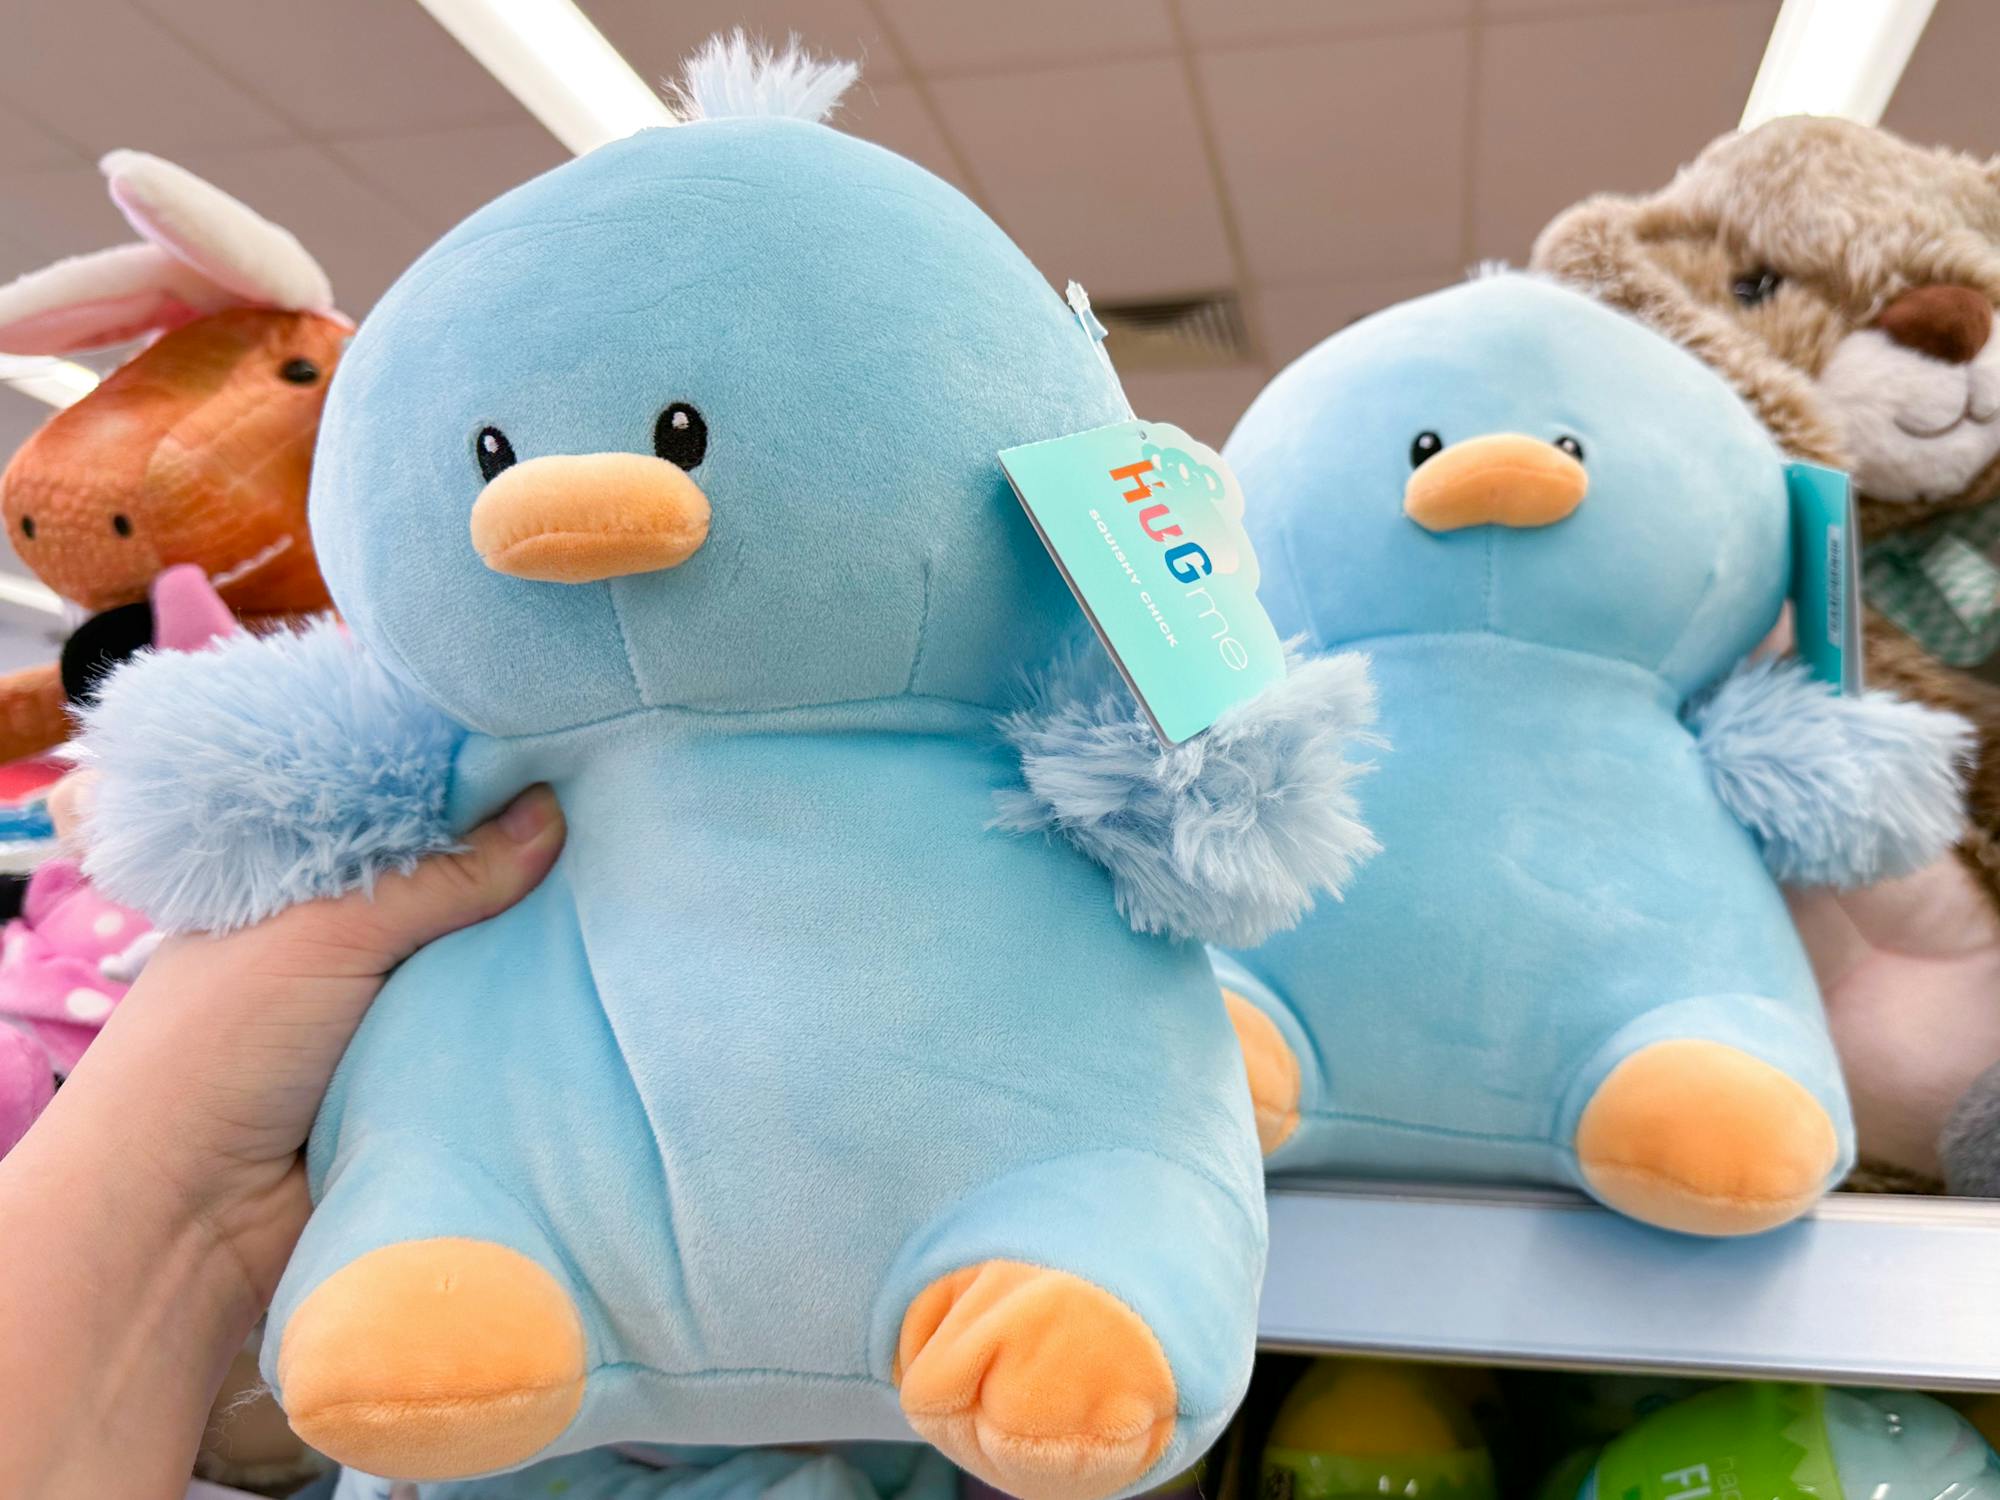 Someone taking a squishy blue chick stuffed animal from a shelf at Walgreens